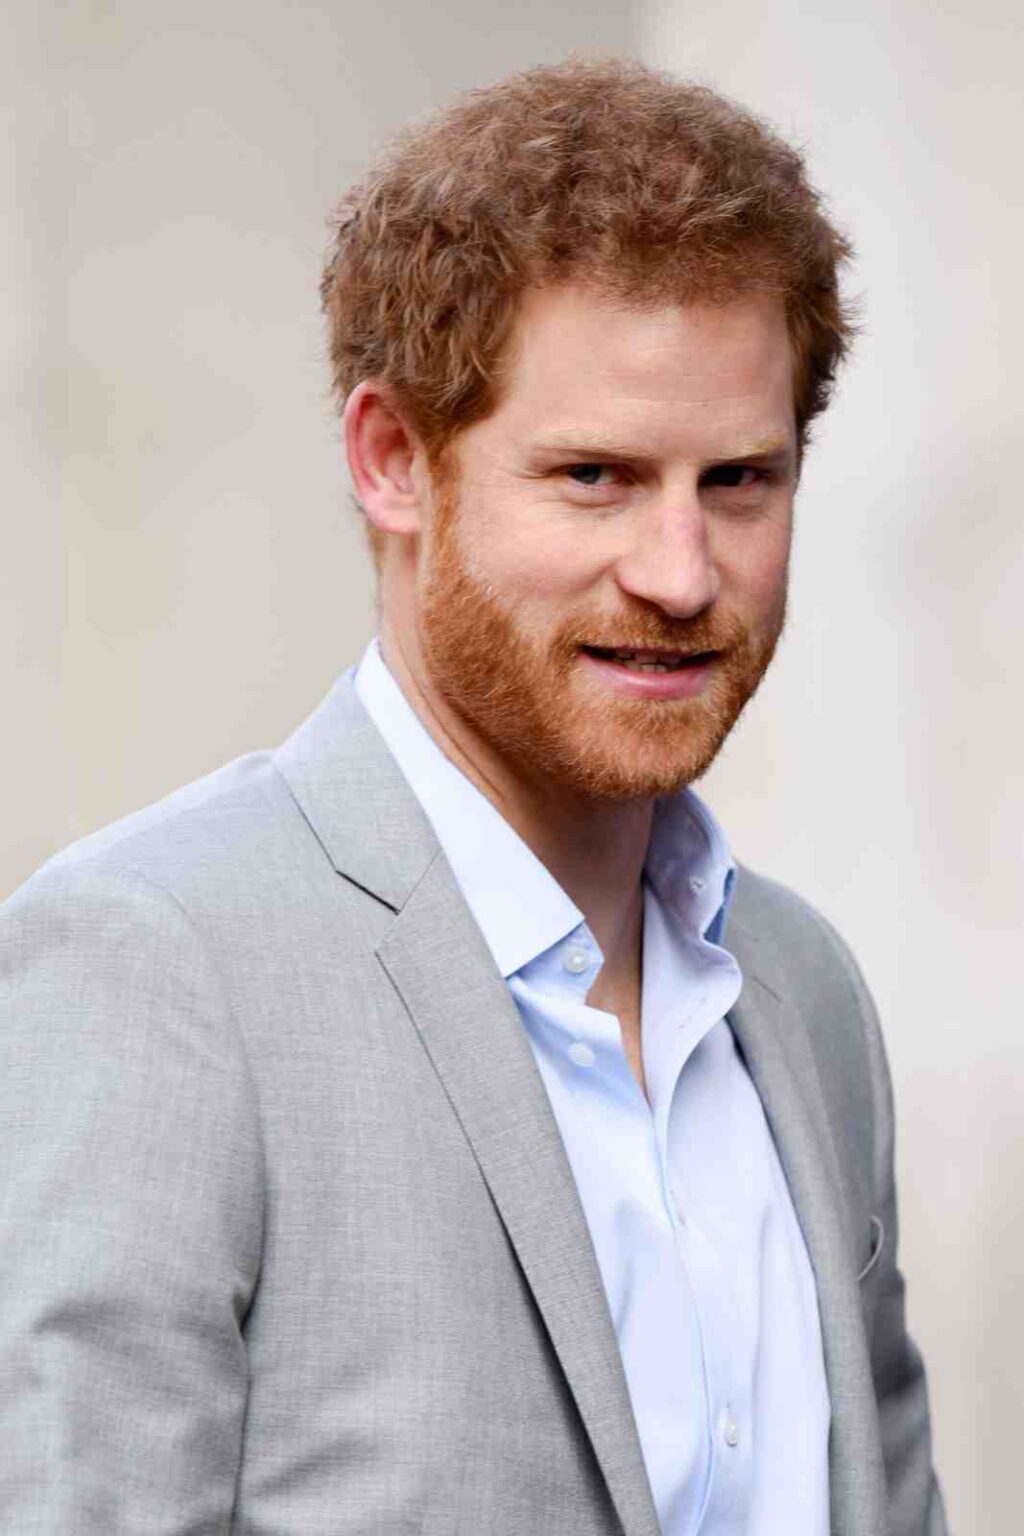 Unravel the royal riddle of Prince Harry's net worth. Discover how mending fences with William might give Harry's coffers a princely boost. Click for the regal scoop!